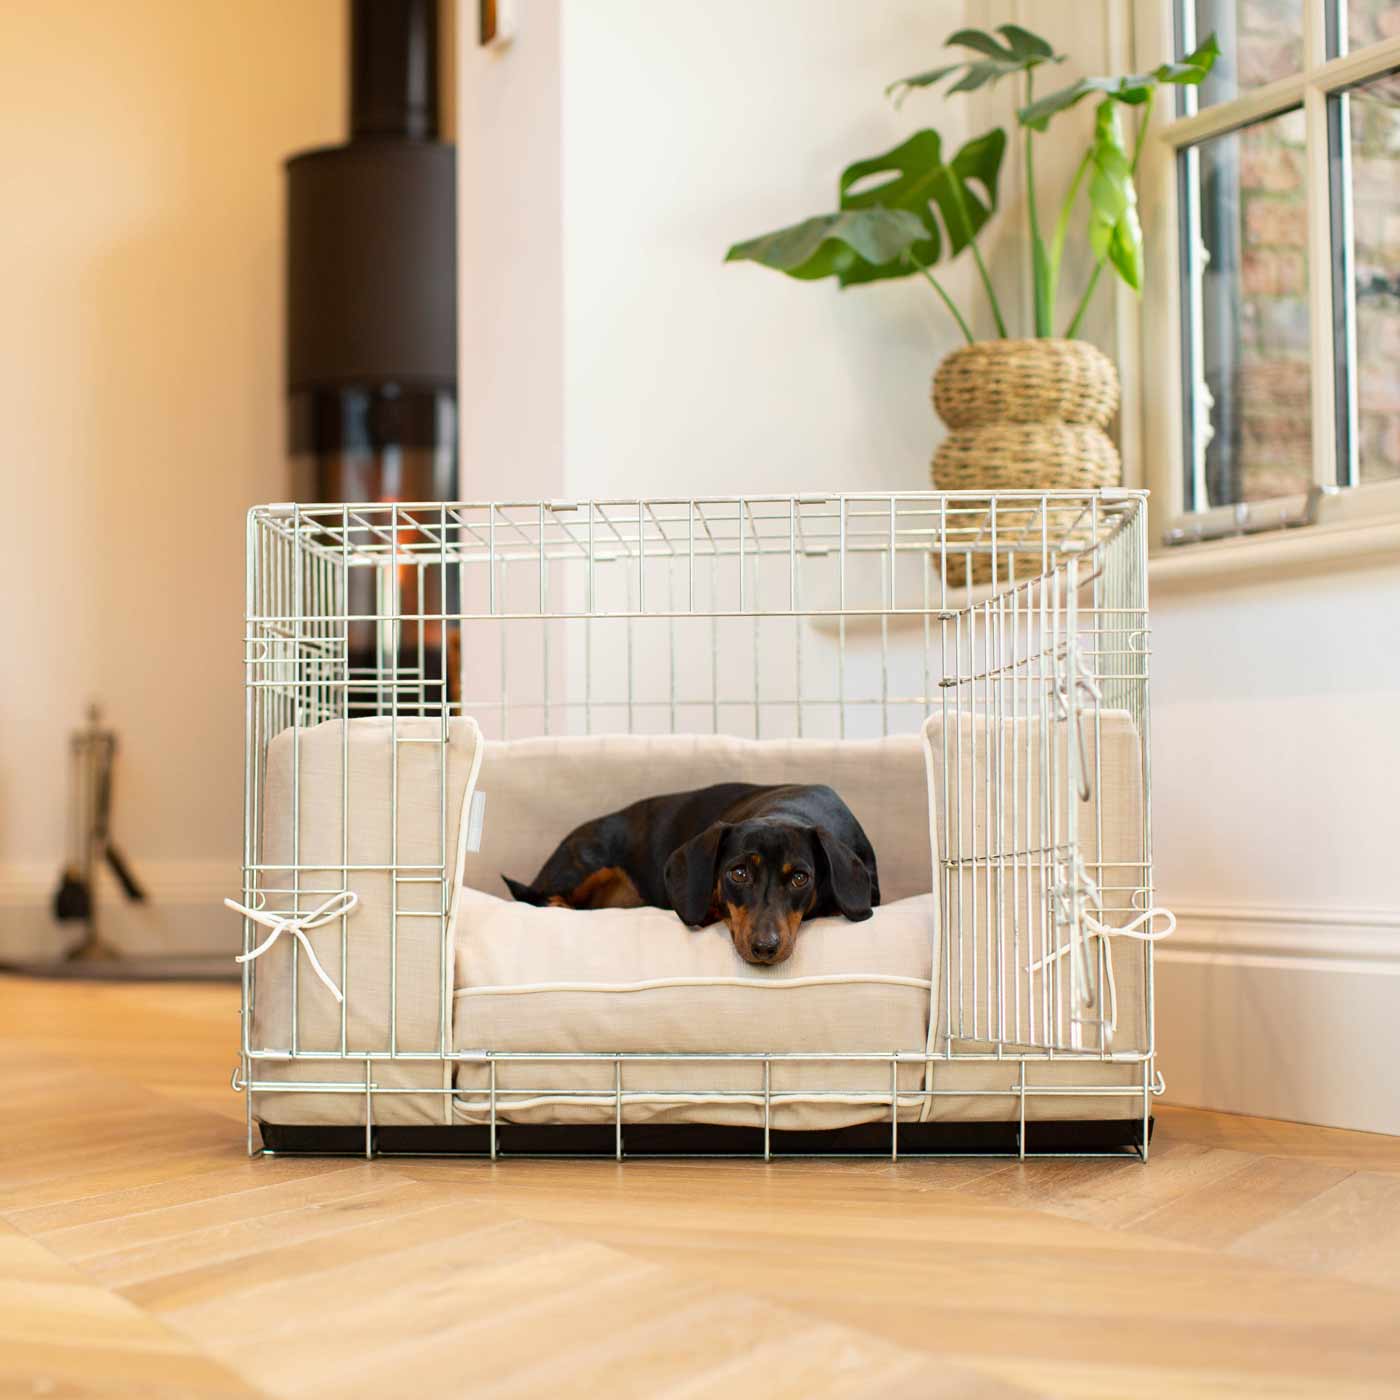 [color:savanna oatmeal] Accessorize your dog cage with our stunning bumper covers, choose from our Savanna collection! Made using luxury fabric for the perfect cage accessory to build the ultimate dog den! Available now in 3 colors and sizes at Lords & Labradors US